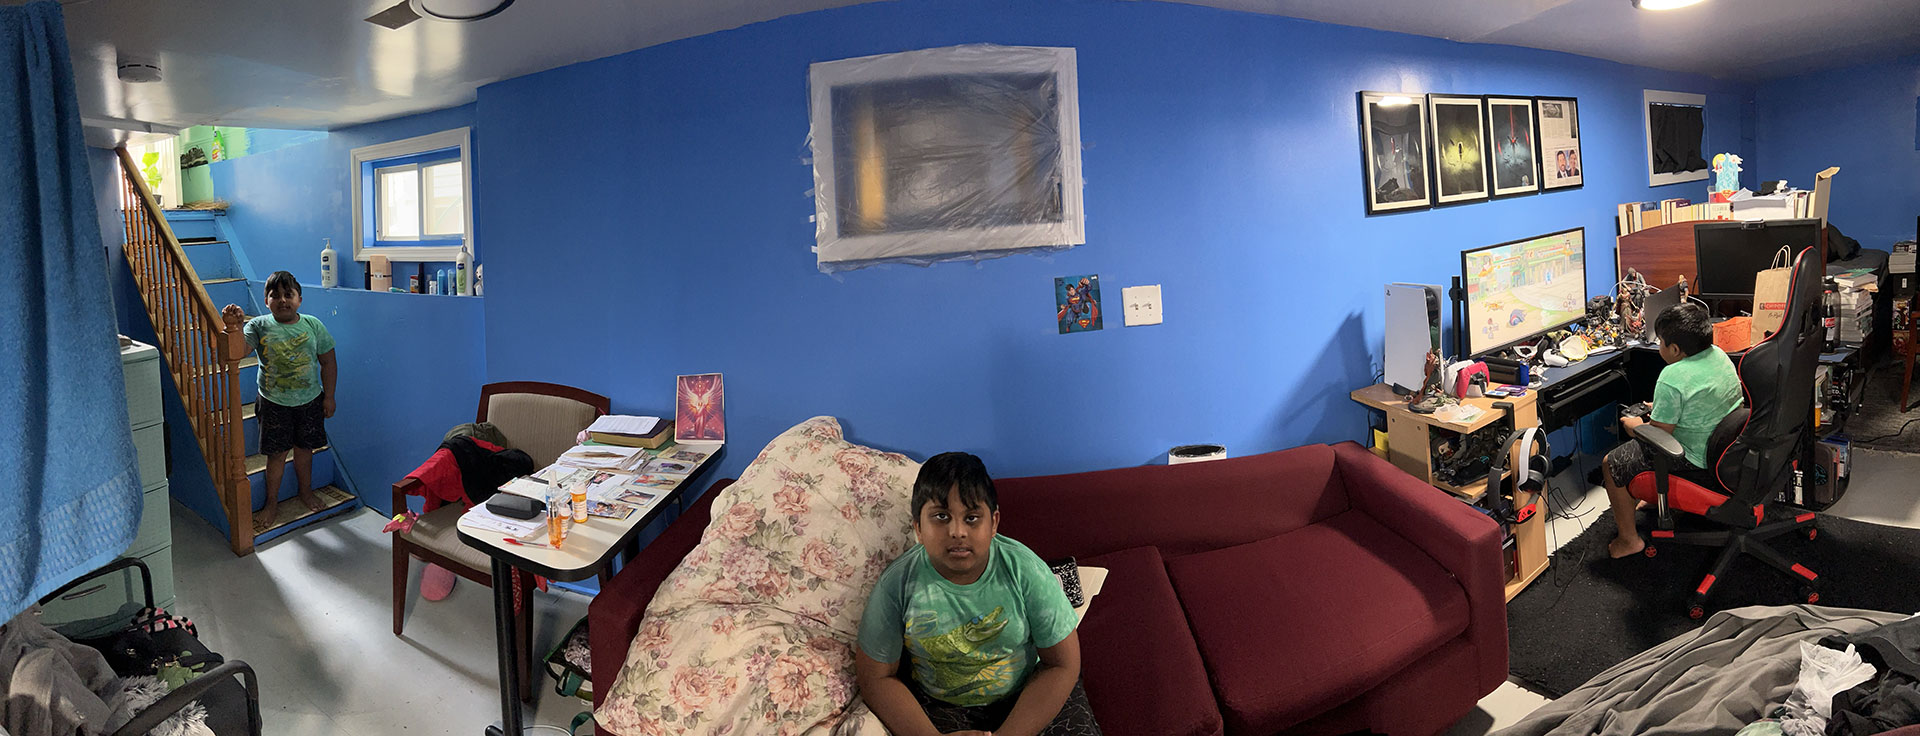 Panorama of boy running to play video games